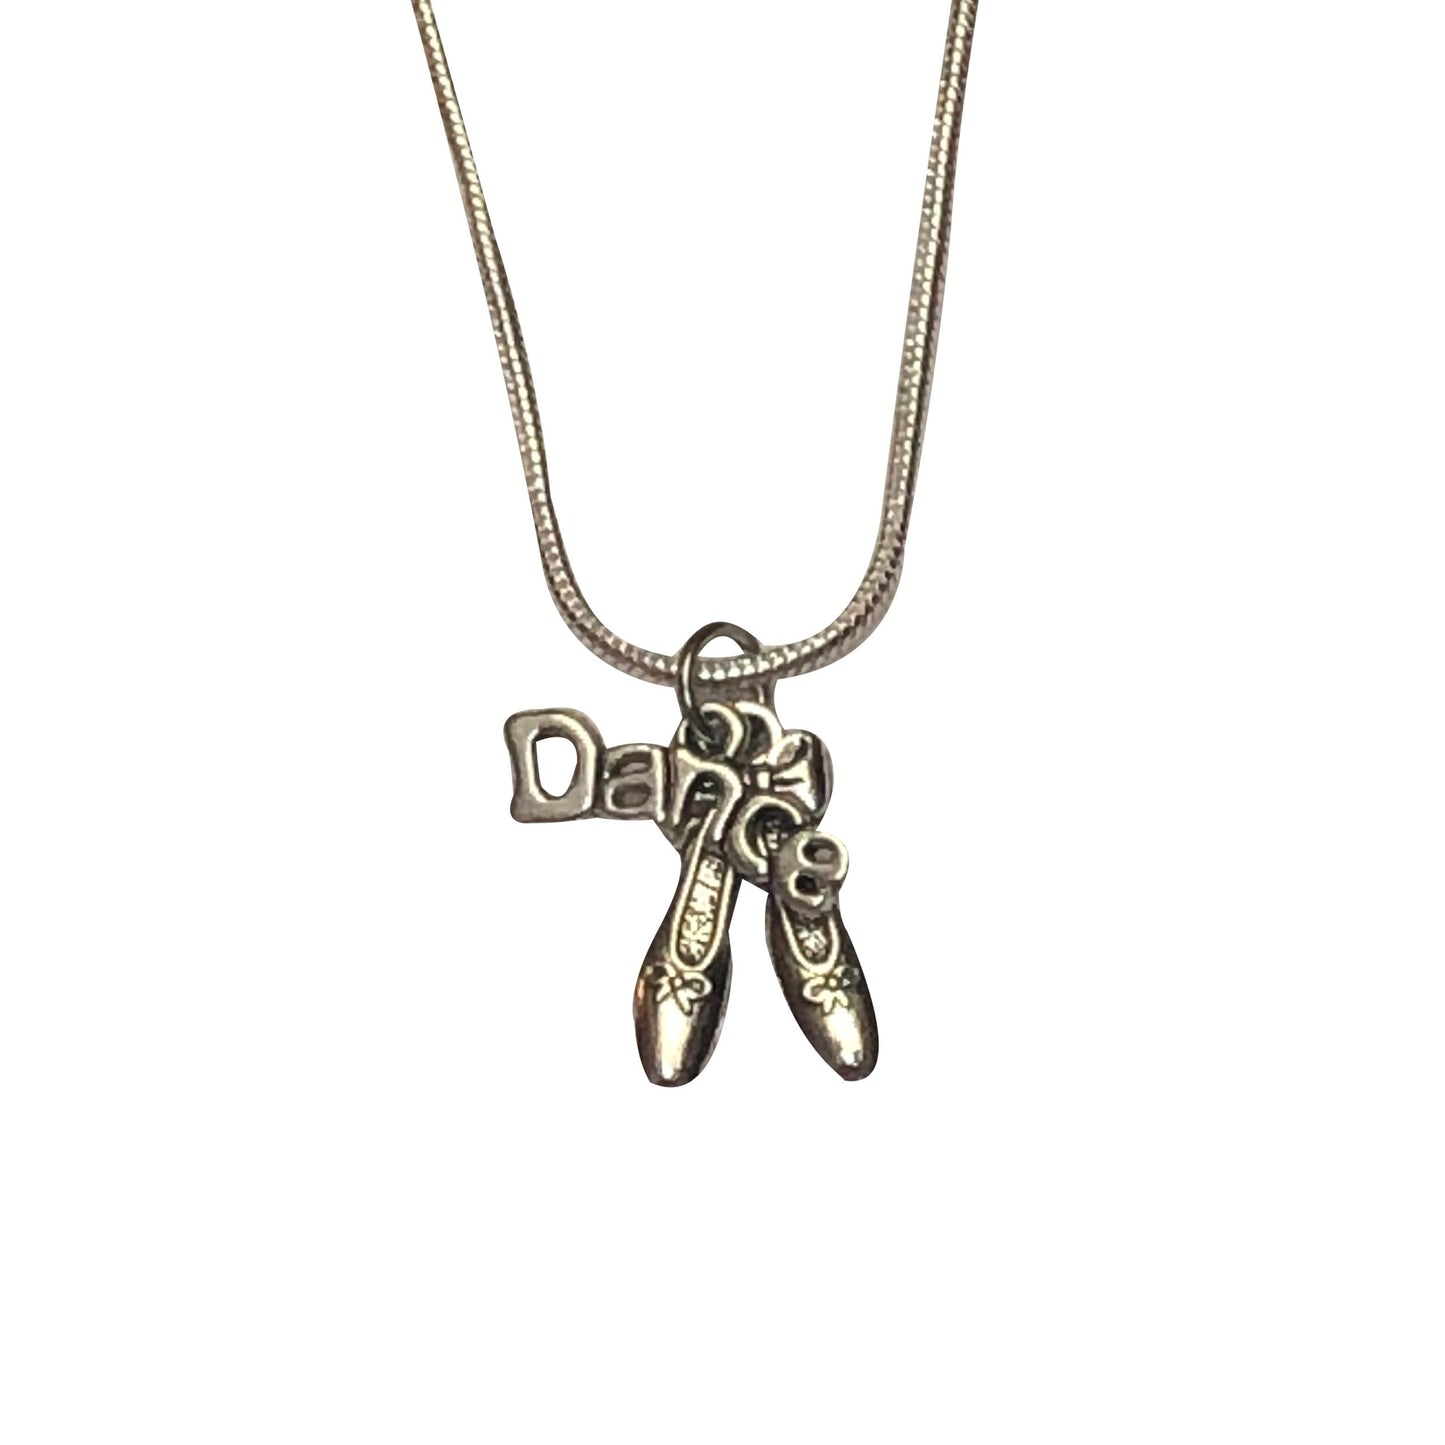 Dance Charm Necklace Sterling Silver - Cheer and Dance On Demand